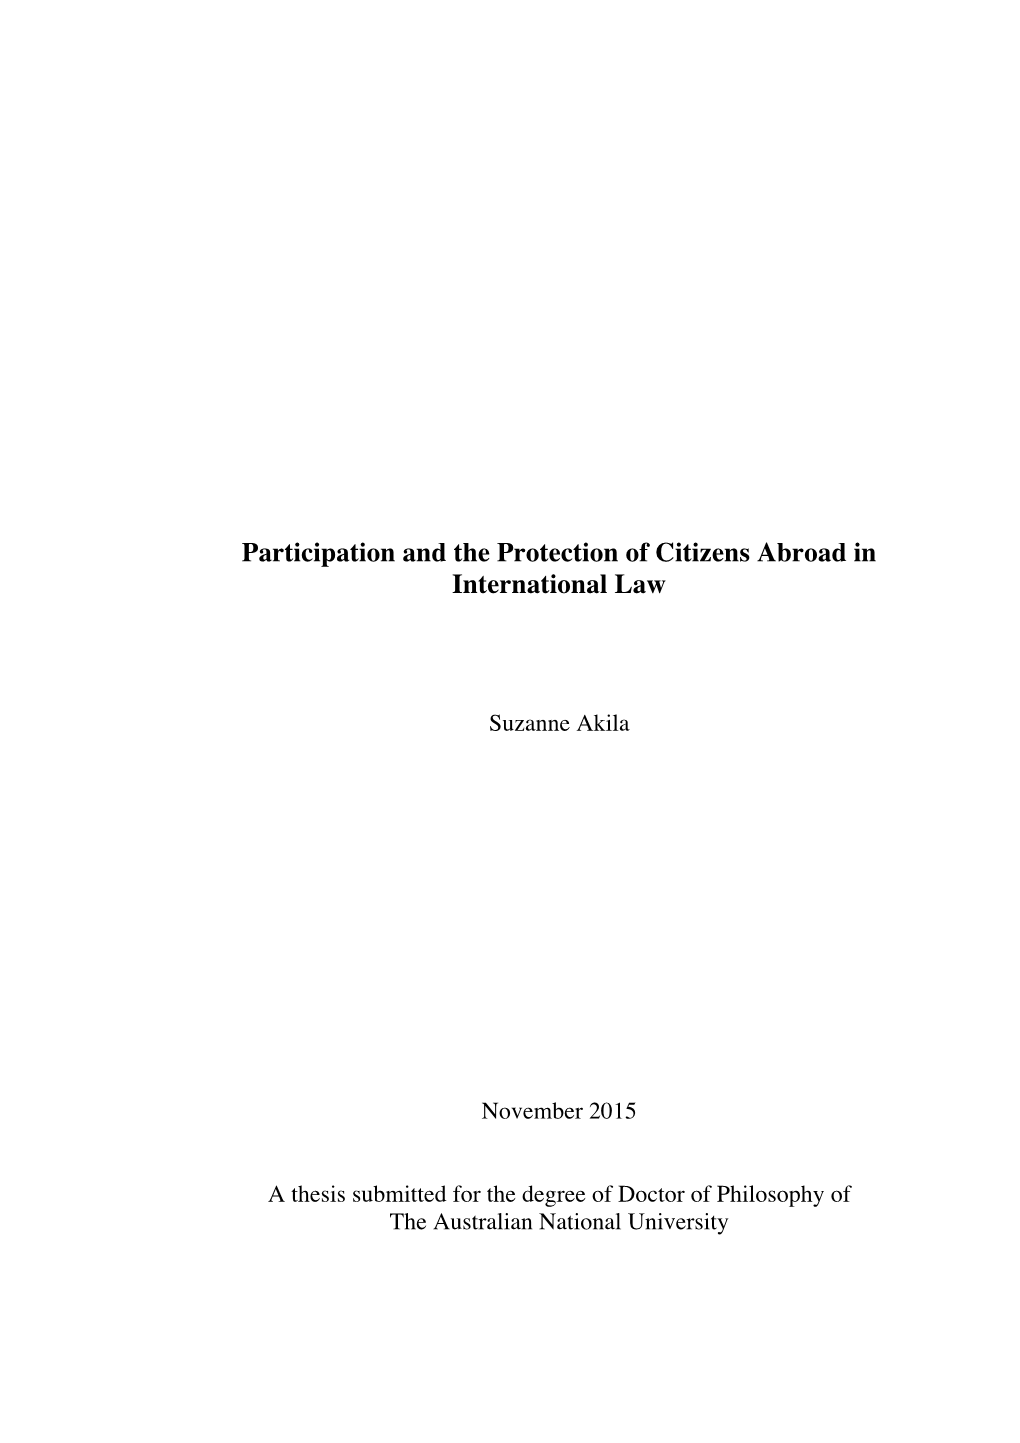 Participation and the Protection of Citizens Abroad 31102016